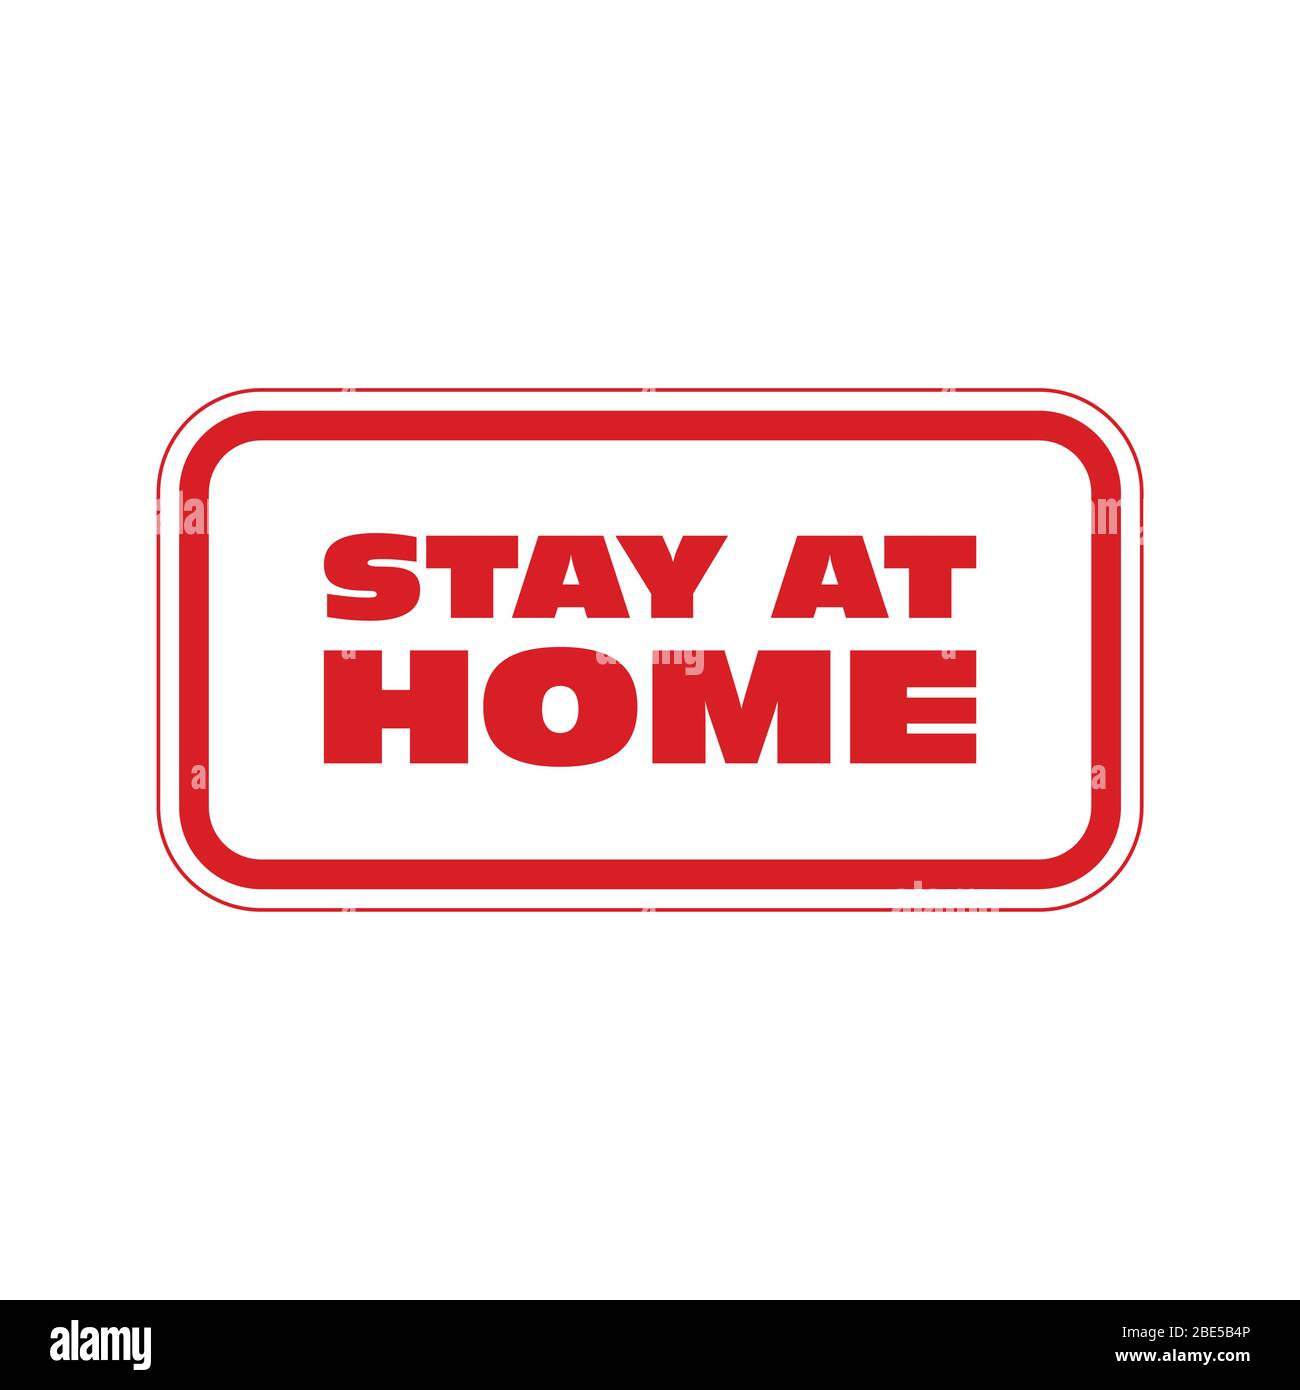 Stay at home - placard, call to self isolation and quarantine, sticker Stock Vector